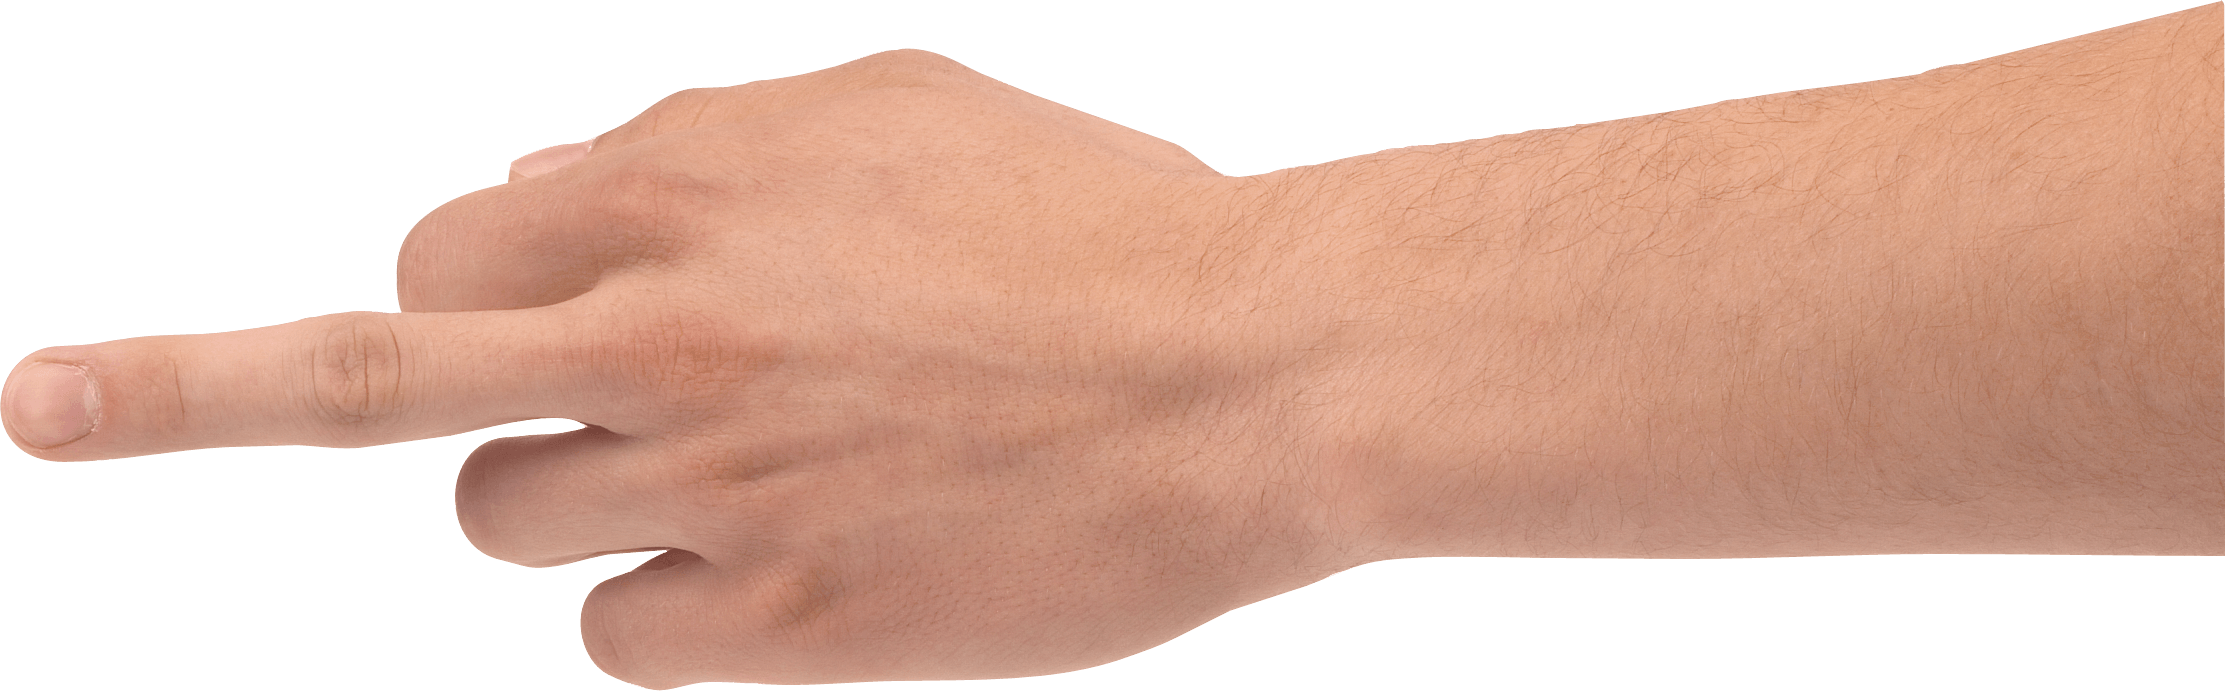 One Finger Hand Hands Png Hand Image  PNG Image